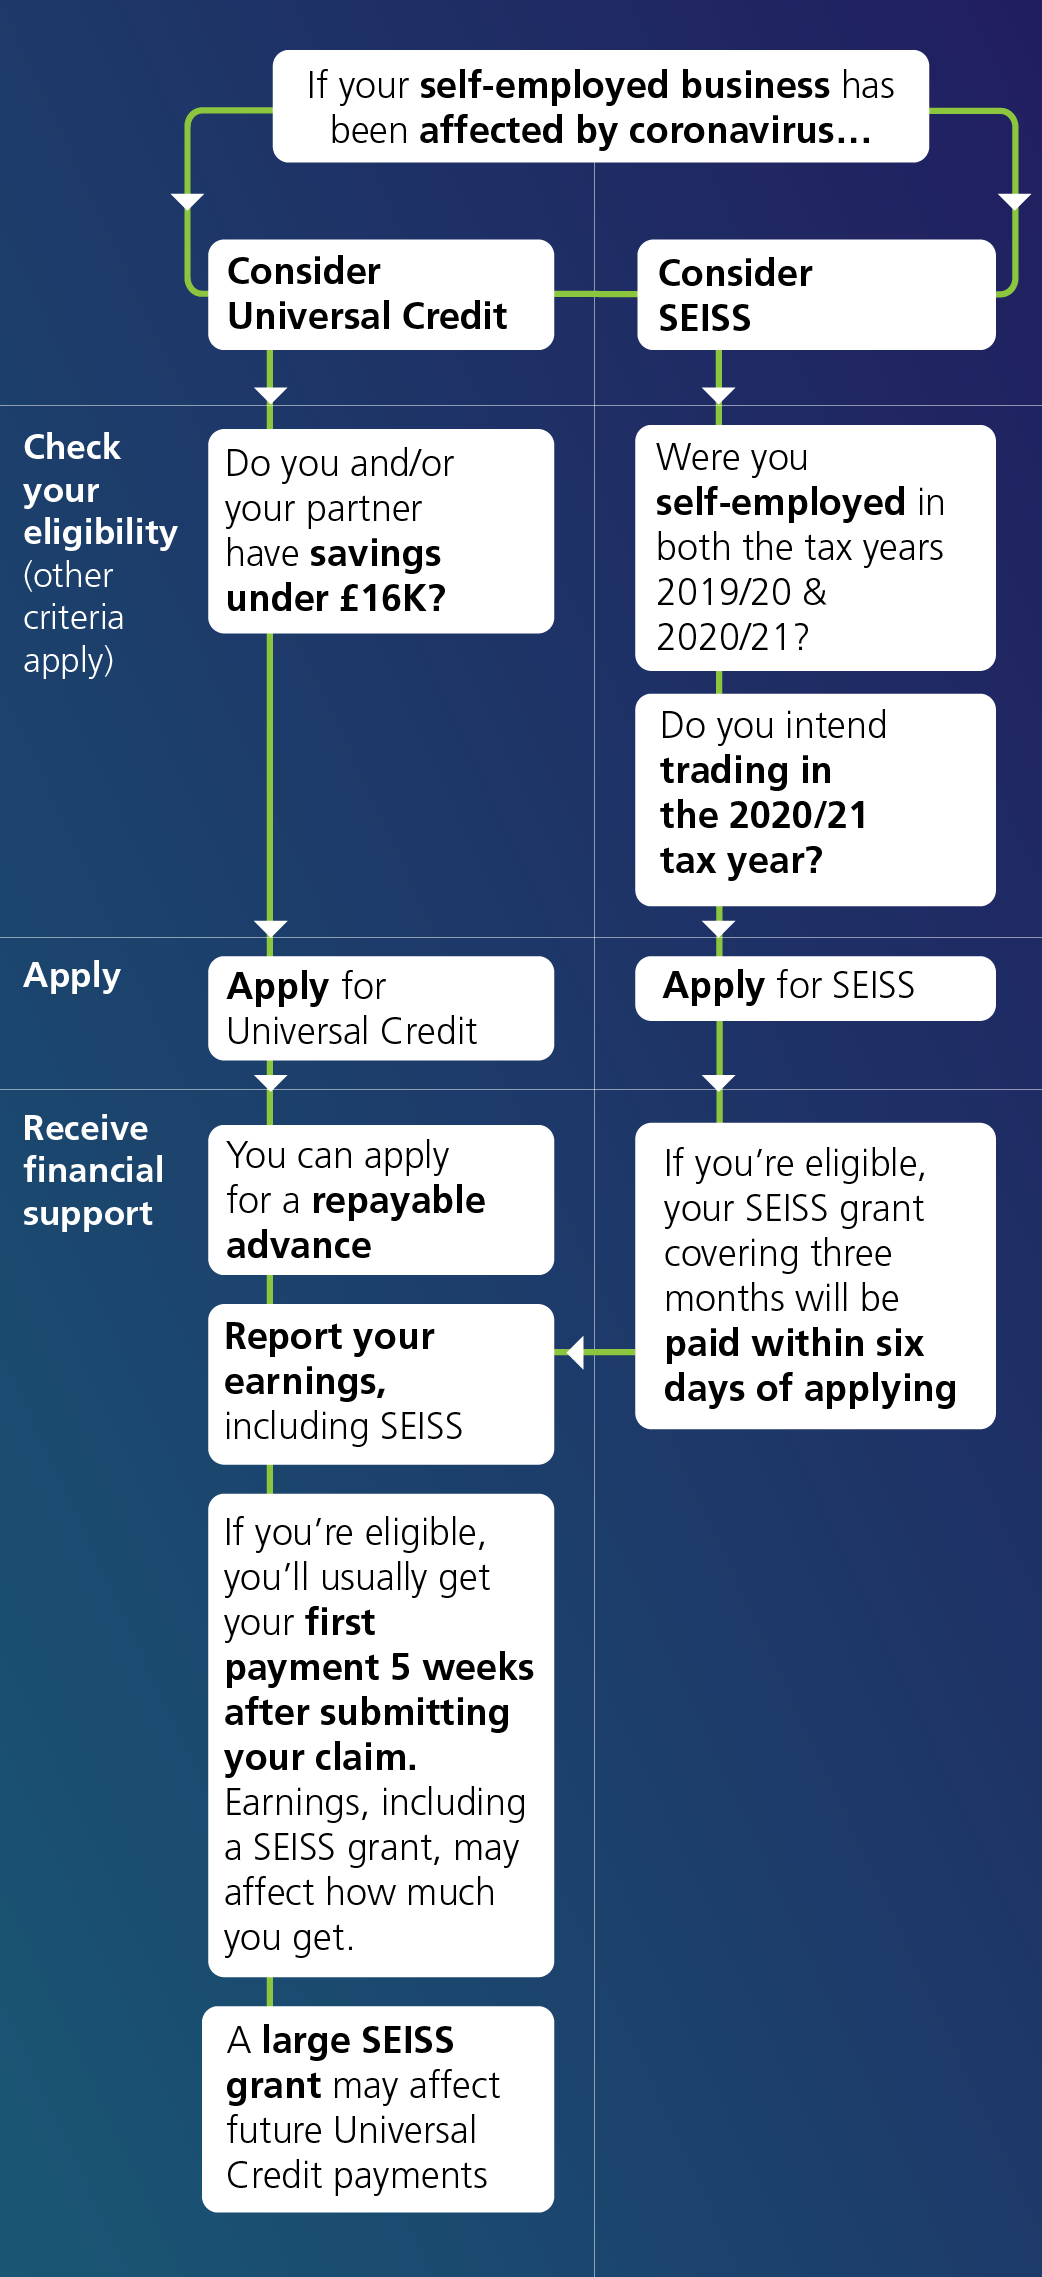 Flow chart explaining the basic eligibility rules for Universal Credit and SEISS